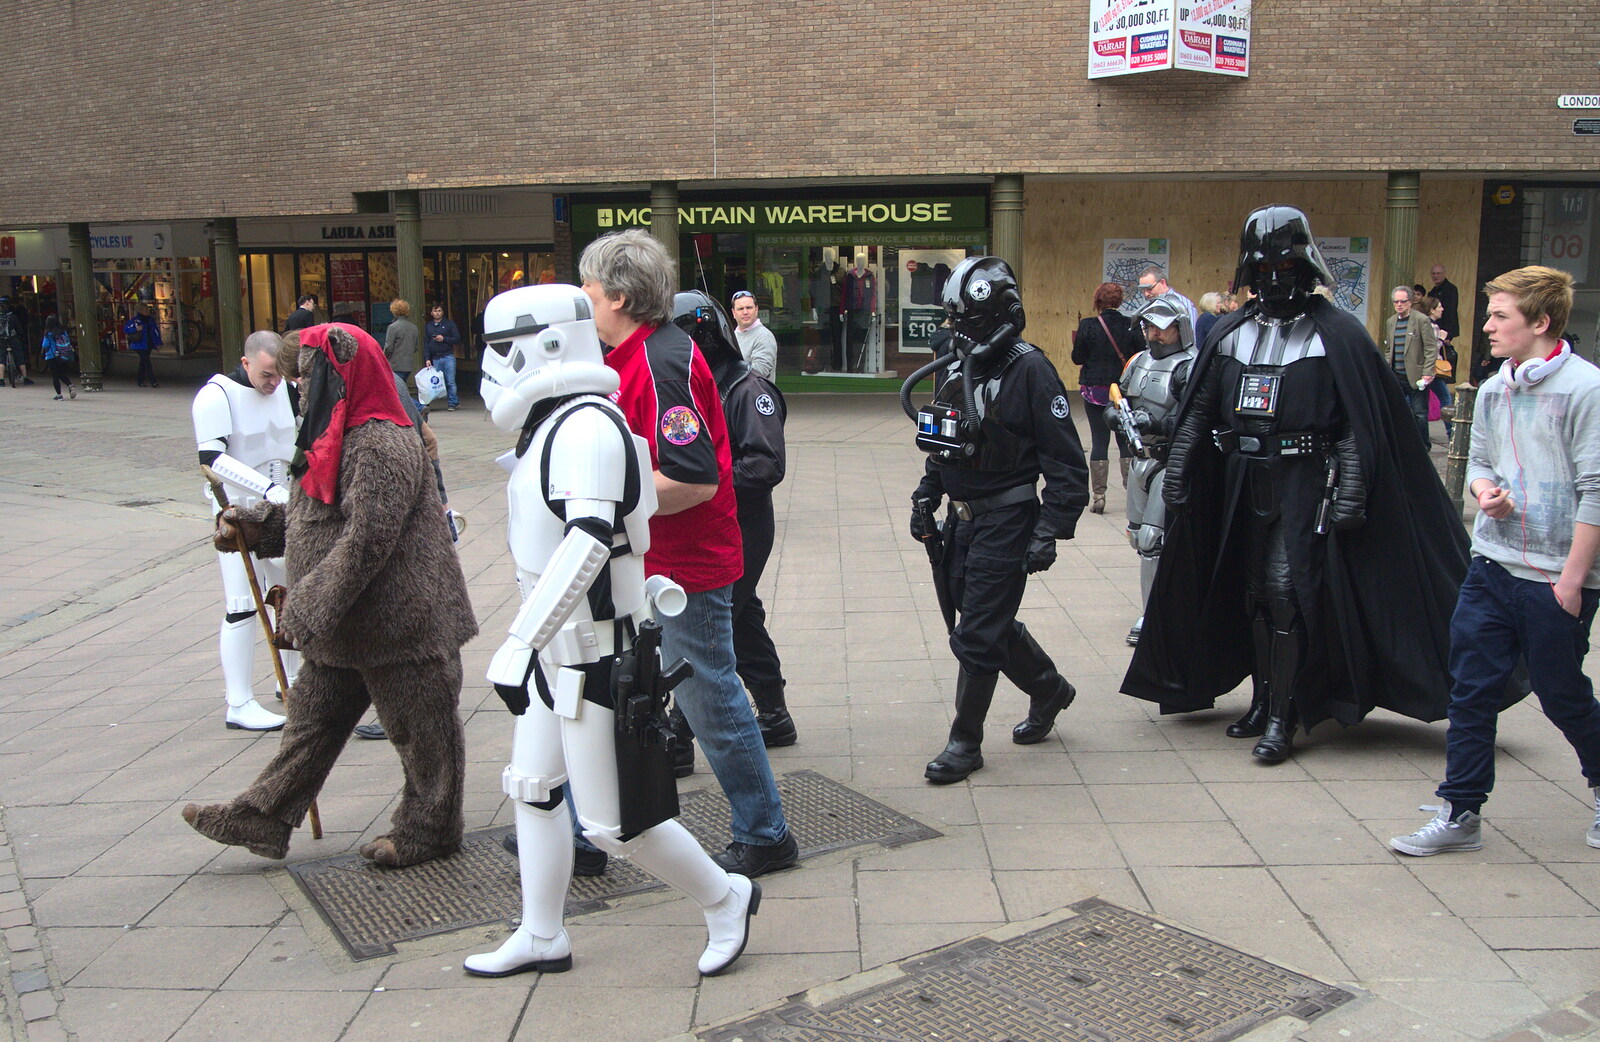 Stormtroopers and Darth Vader stroll around from A Very Random Norwich Day, and The BBs at Laxfield, Norfolk and Suffolk - 13th April 2013